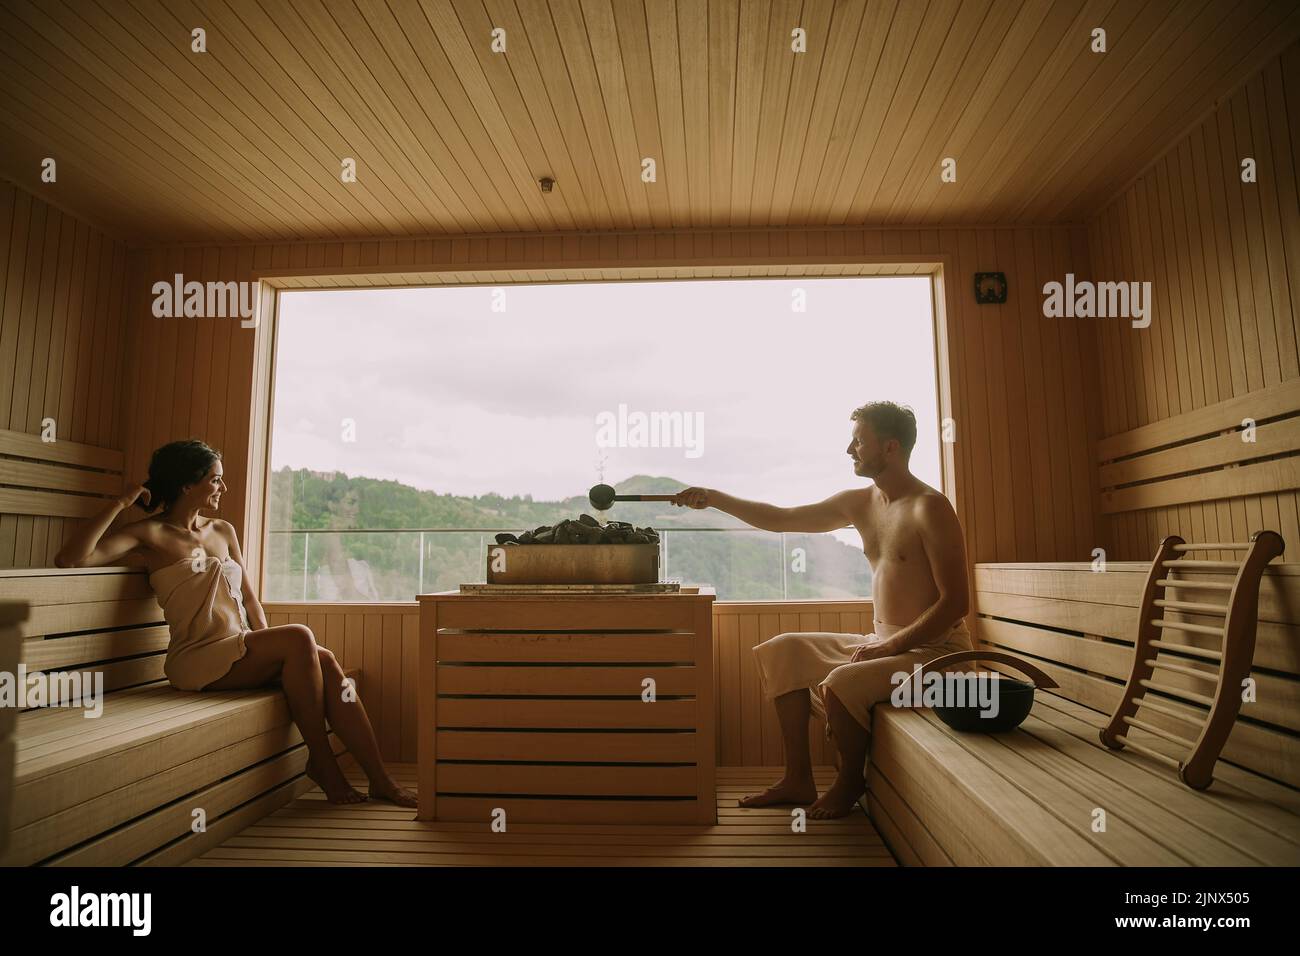 Handsome young couple relaxing in the sauna, while man pouring water on hot rocks Stock Photo